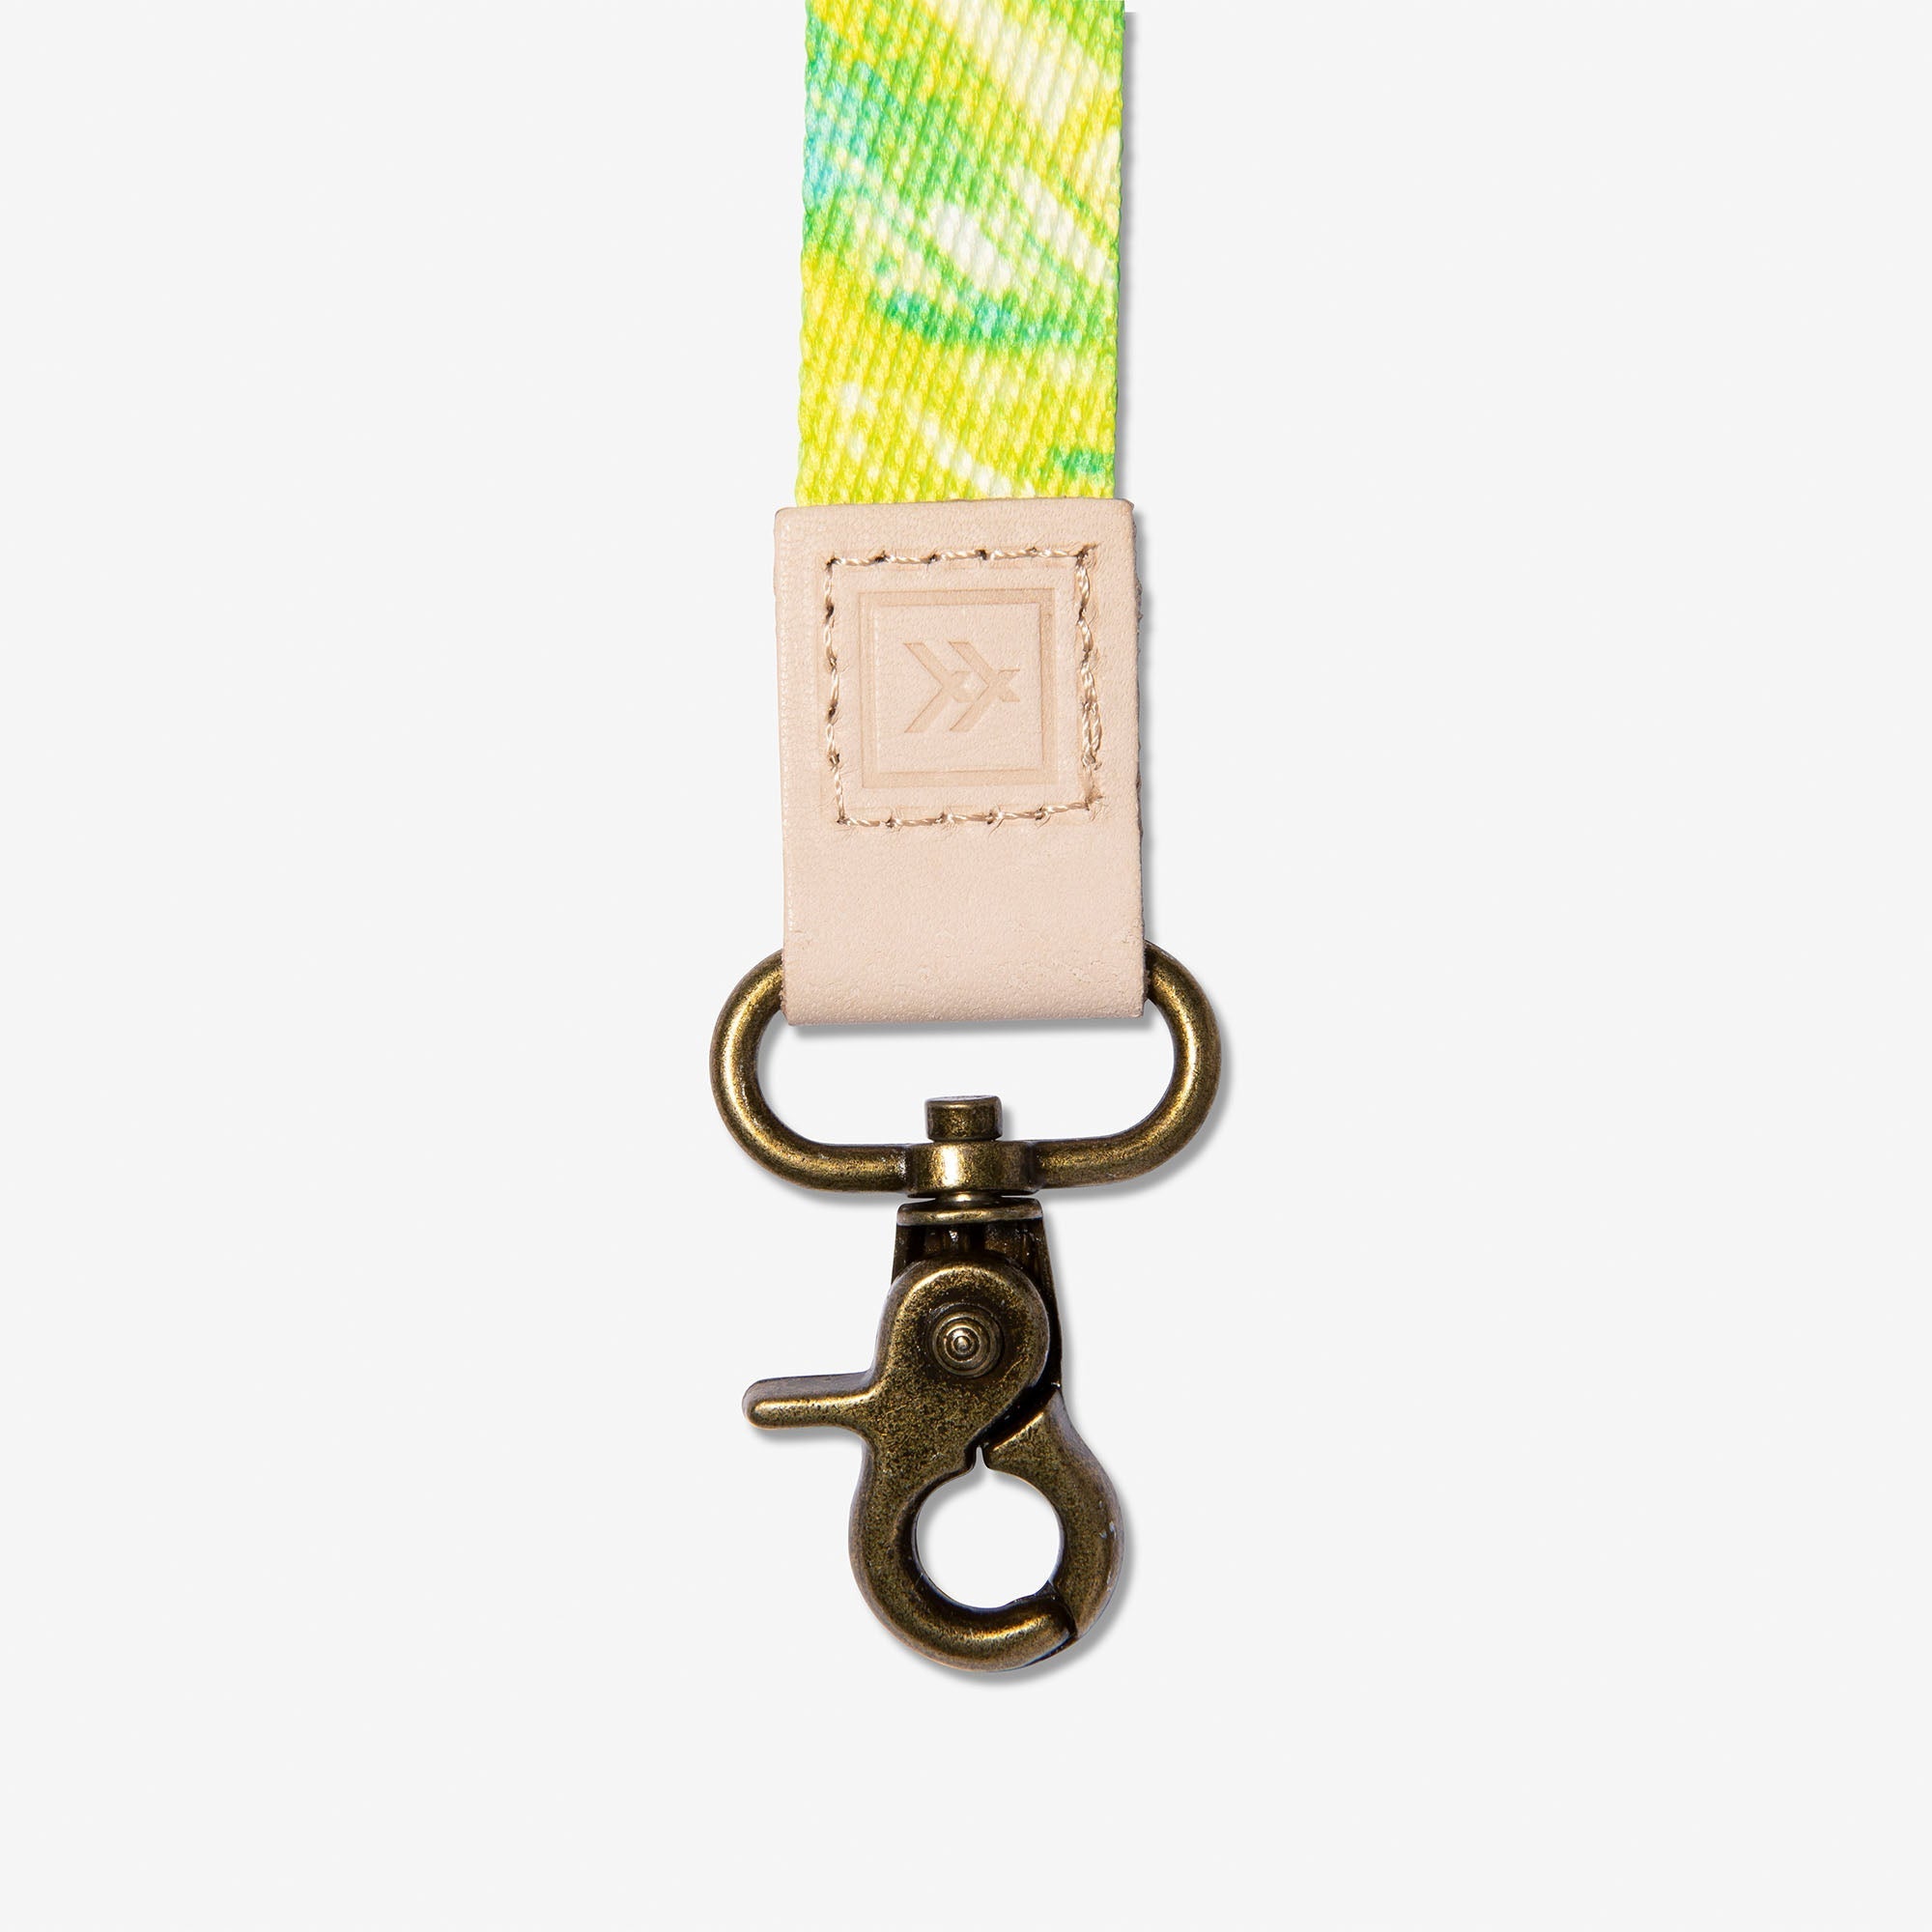 Chartreuse and green wrist lanyard